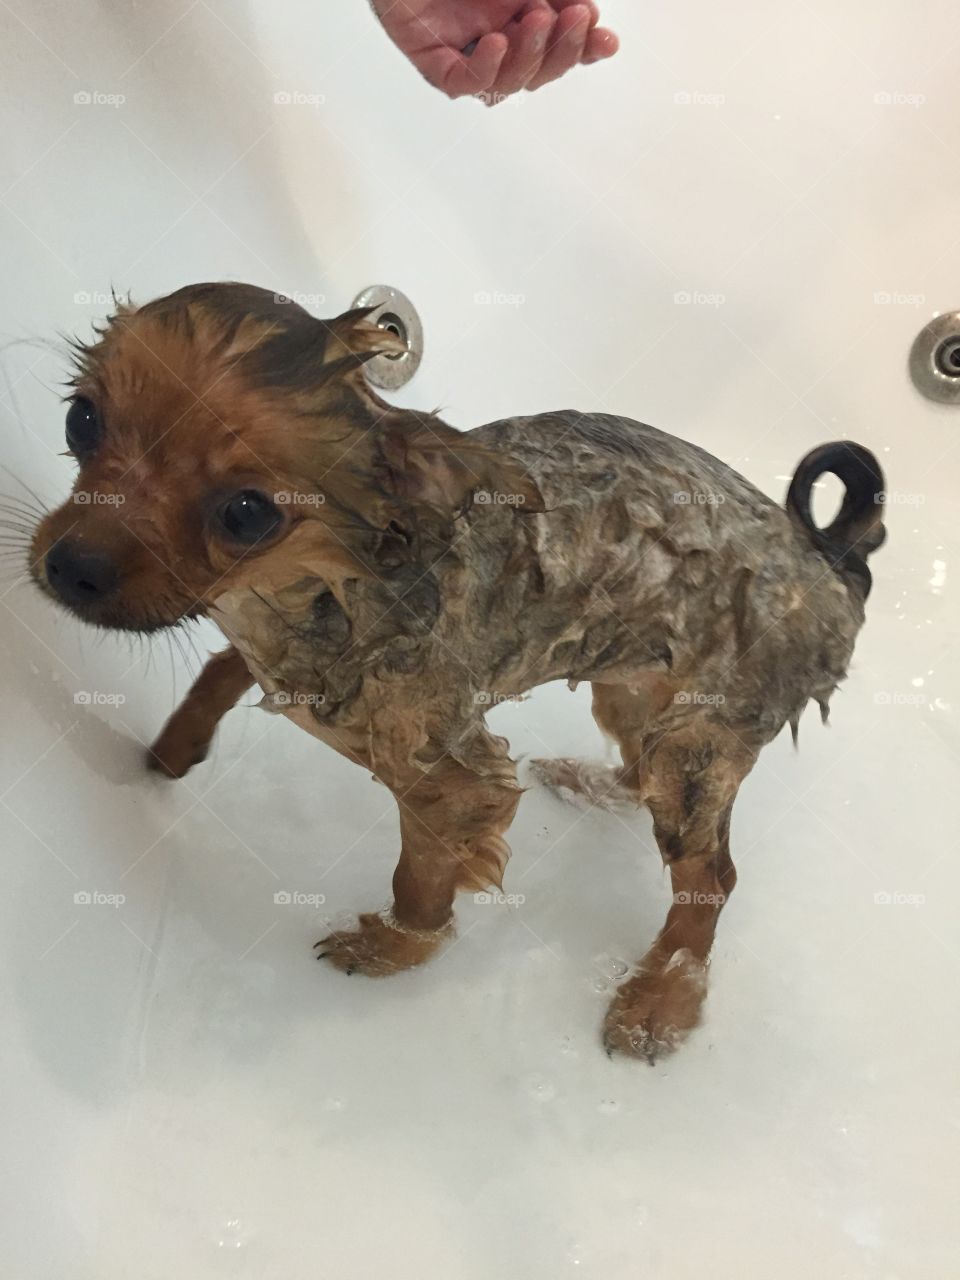 Wet chihuahua puppy in the bathtub 